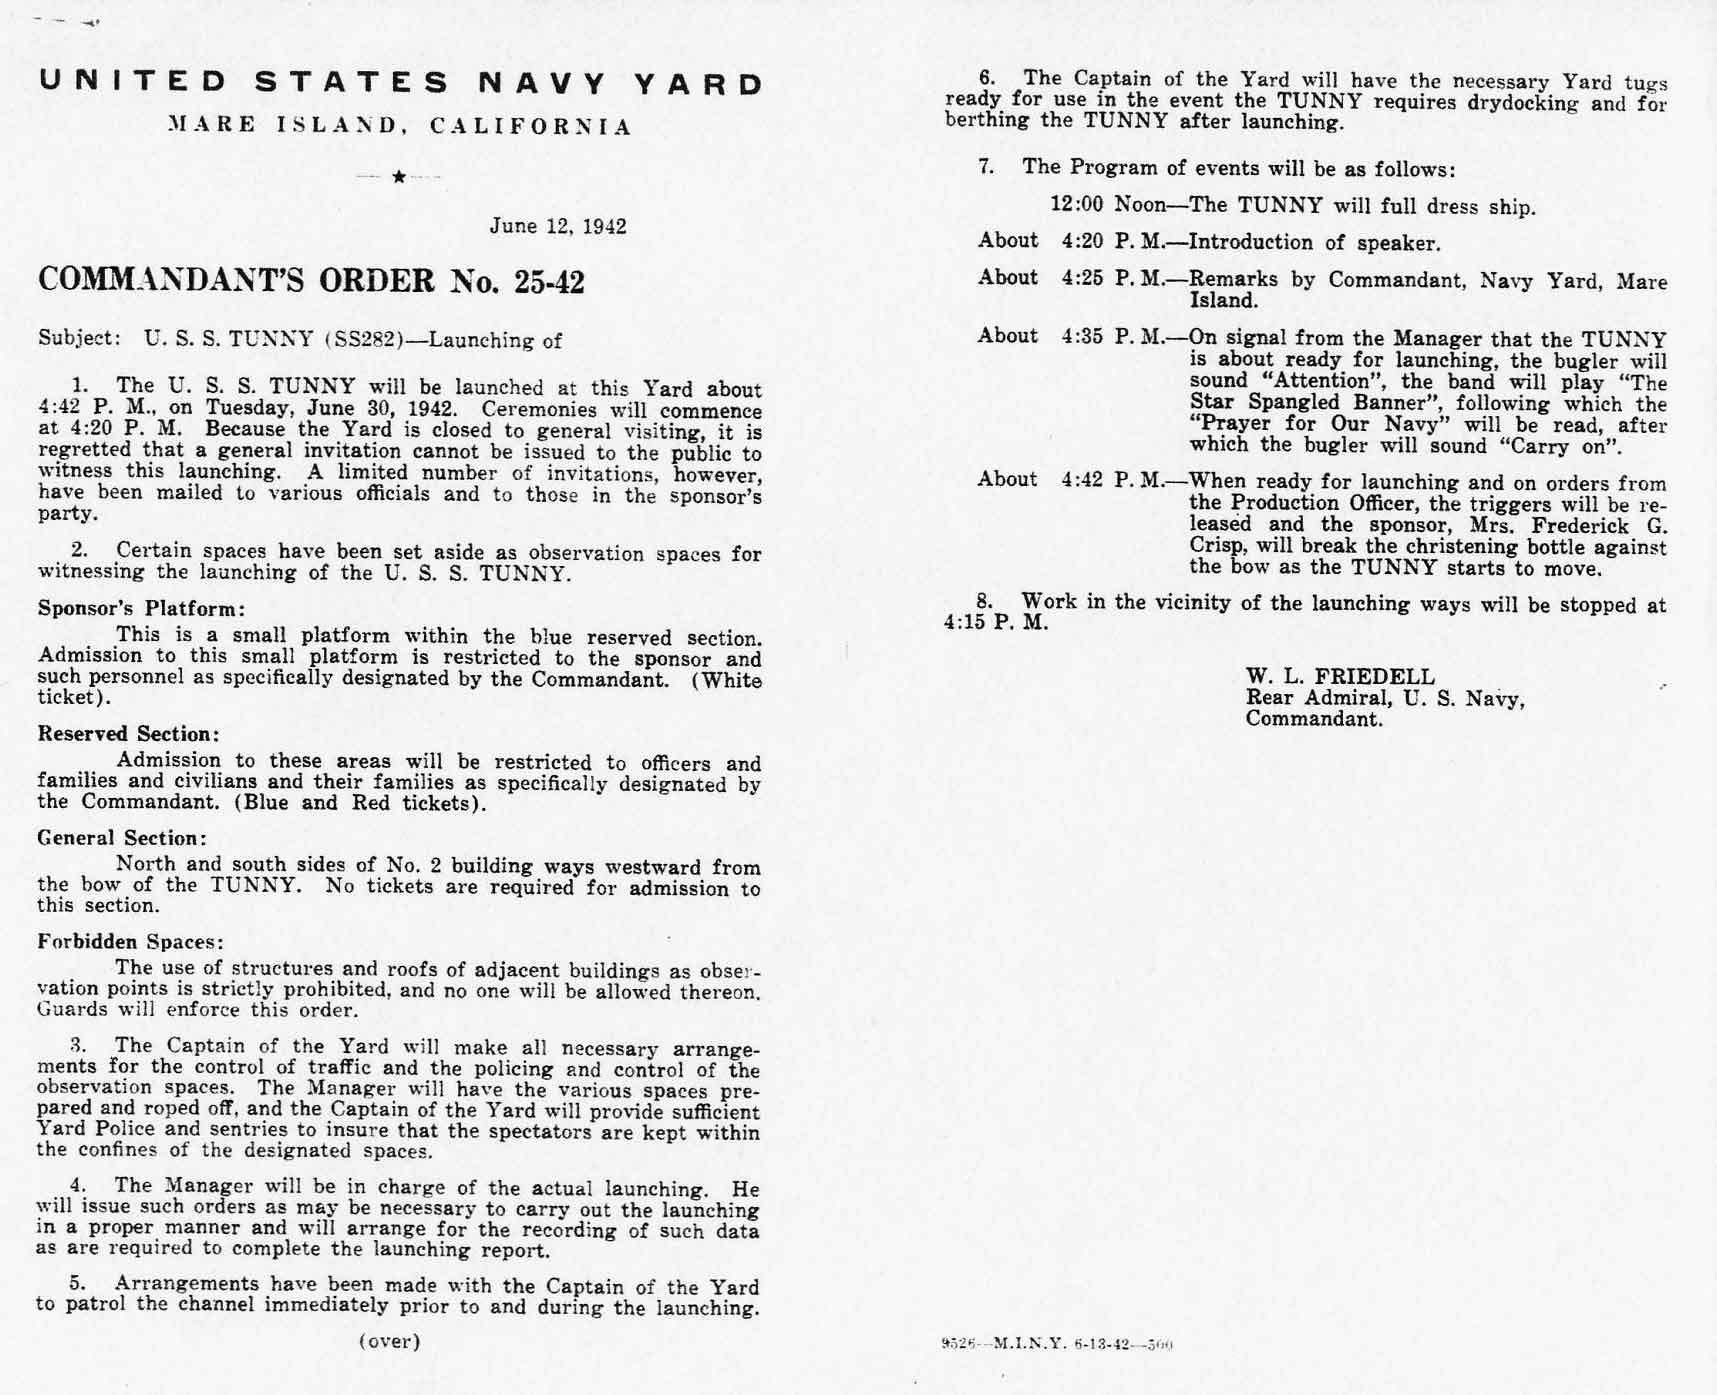 Detailed Operating Schedule for Launching of the Tunny, 30 Jun 1942, page 2 of 2